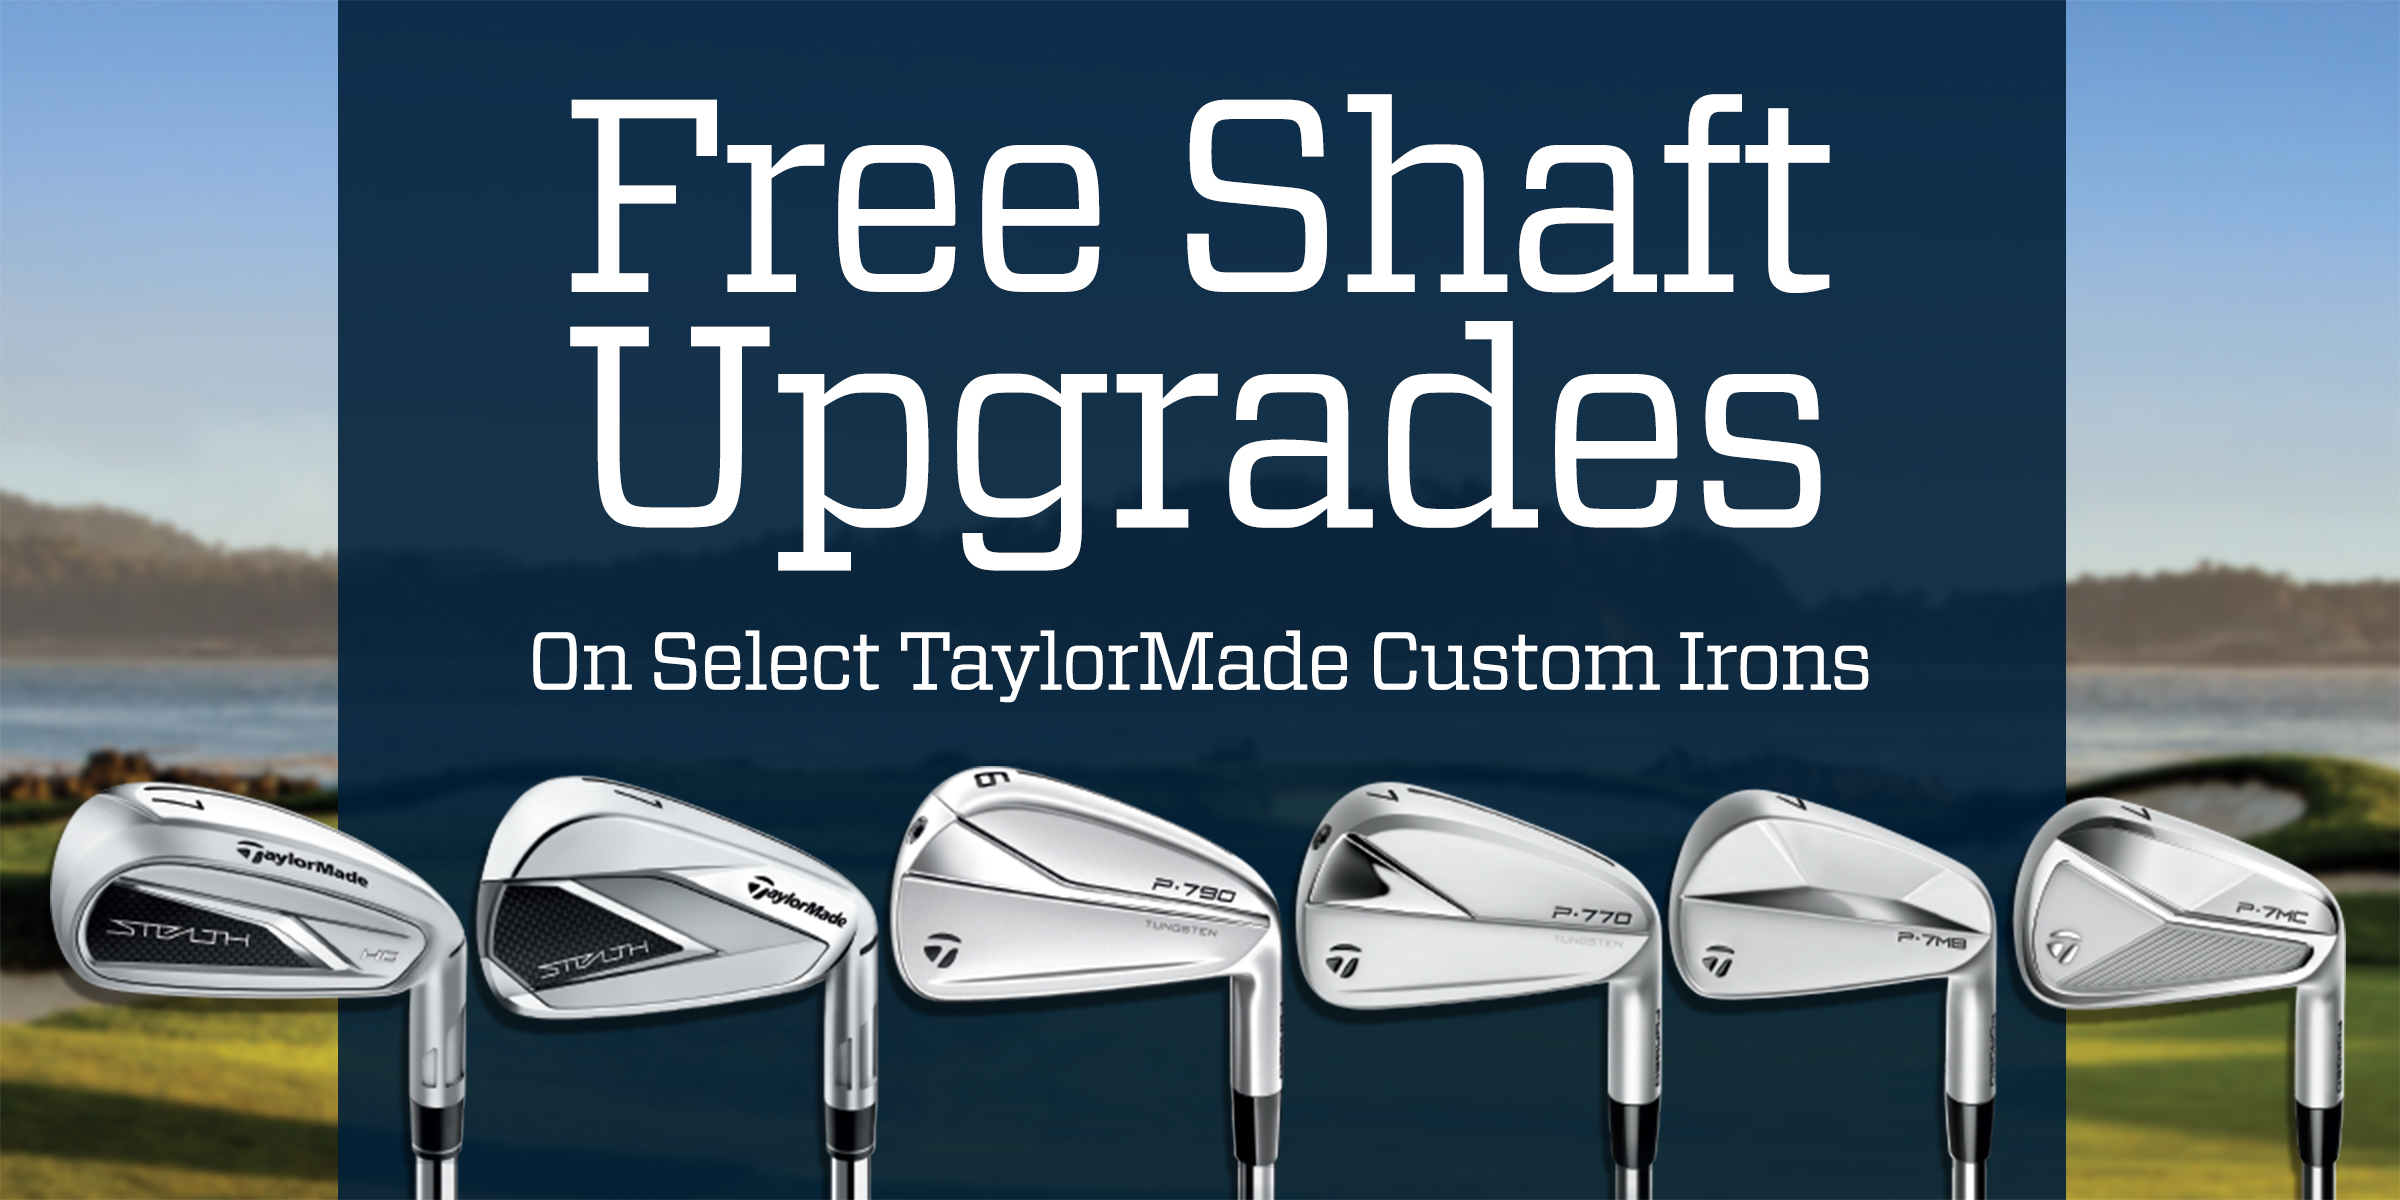  Free shaft upgrades on select TaylorMade custom irons.